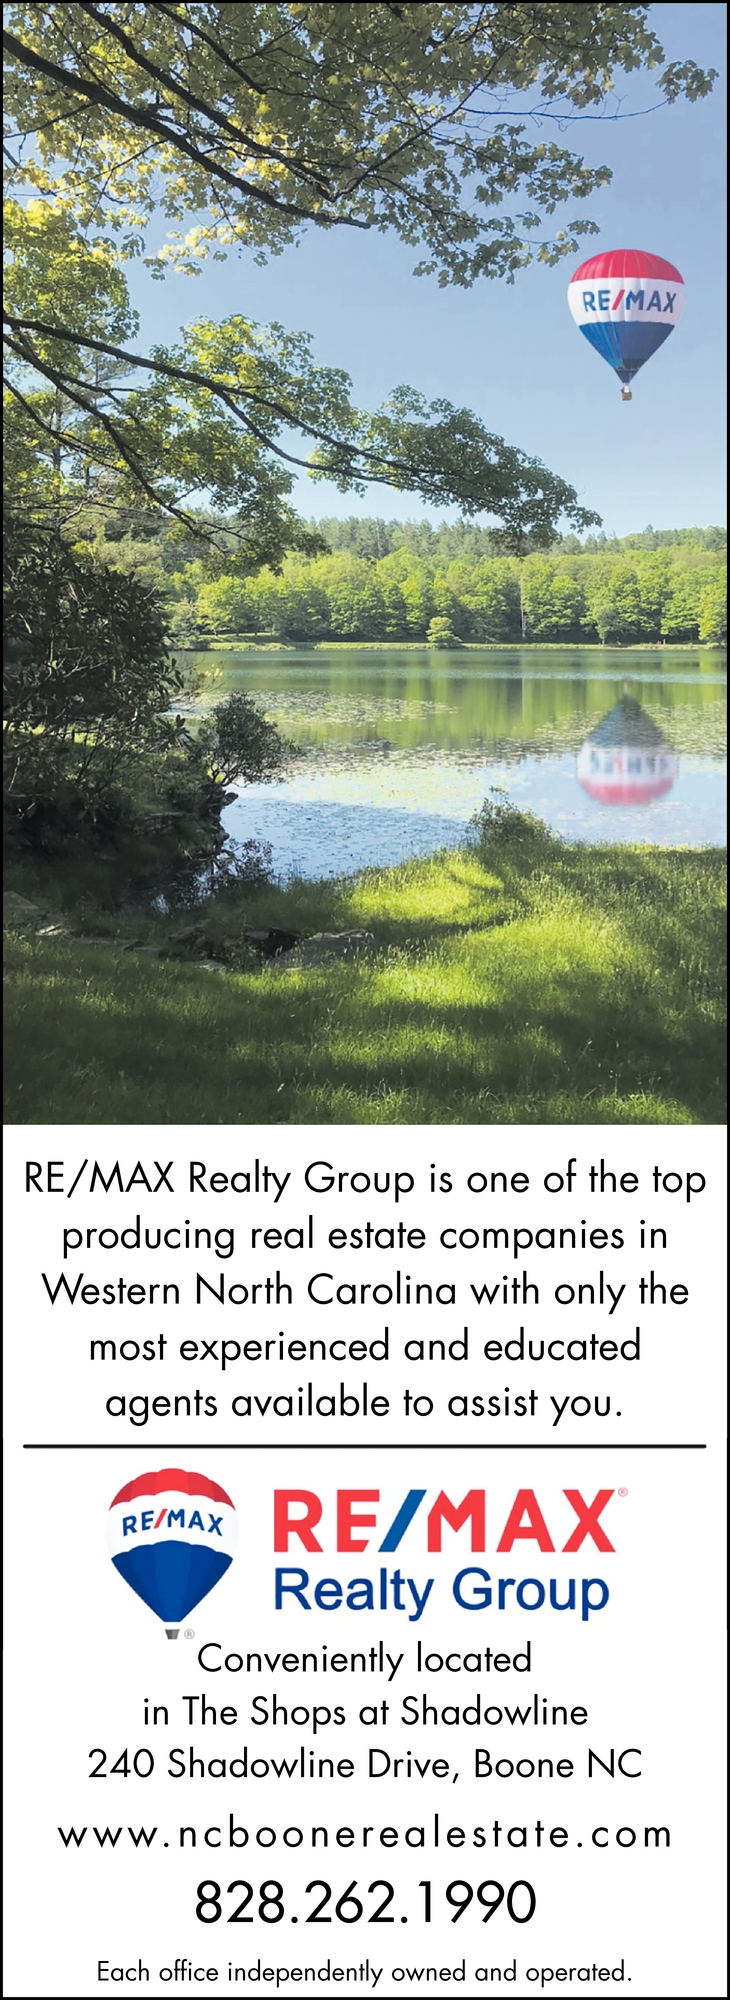 One of the Top Producing Real Estate Companies in Western North Carolina